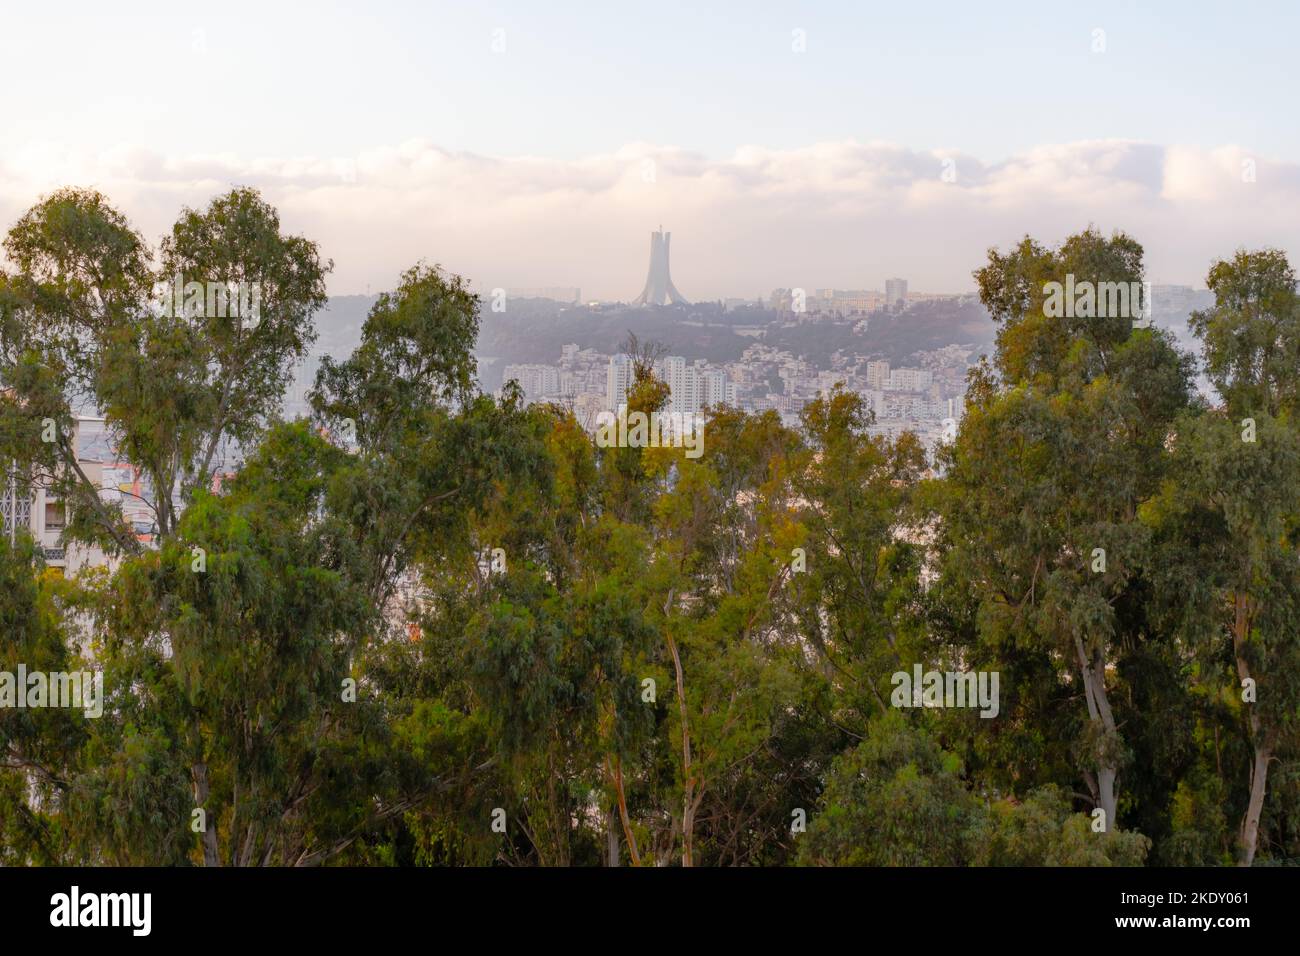 The Martyr's Memorial National Monument of Algiers seen from Ave du Docteur Frantz Fanon, El Djazair. Trees and buildings with sunlight in blue hour. Stock Photo